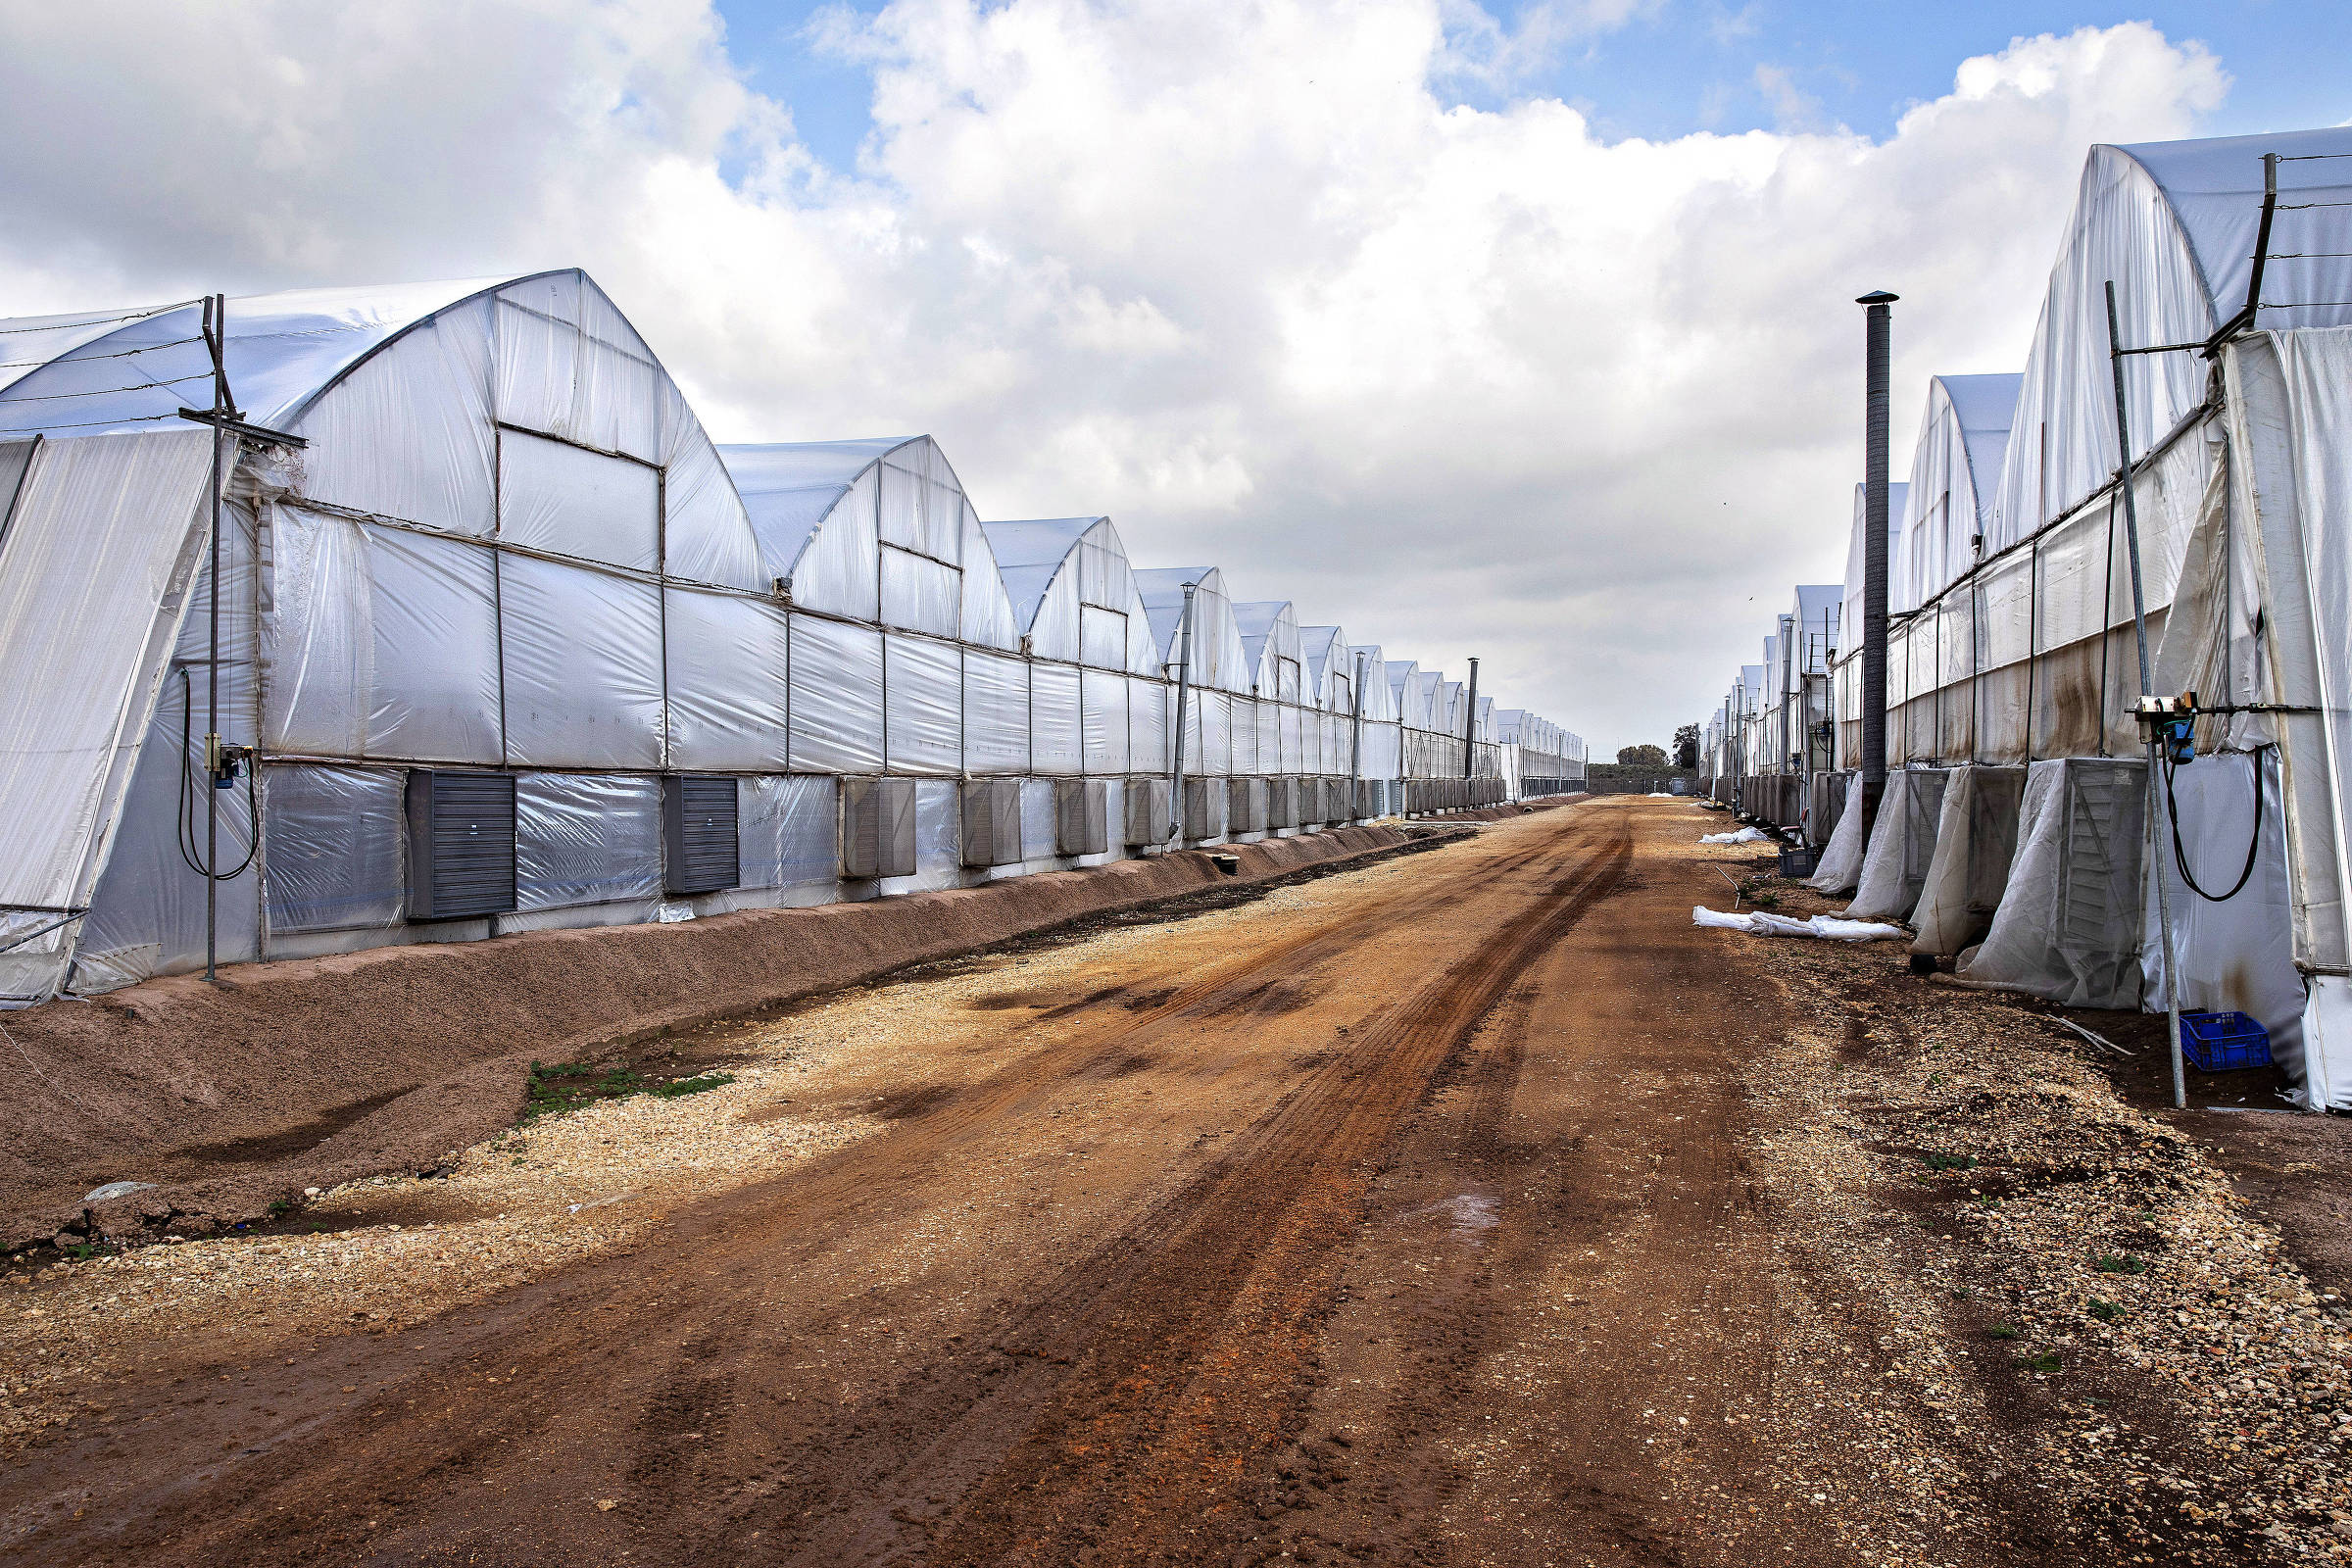 Greenhouses used for cannabis cultivation at Breath of Life Pharma, near Tel Aviv